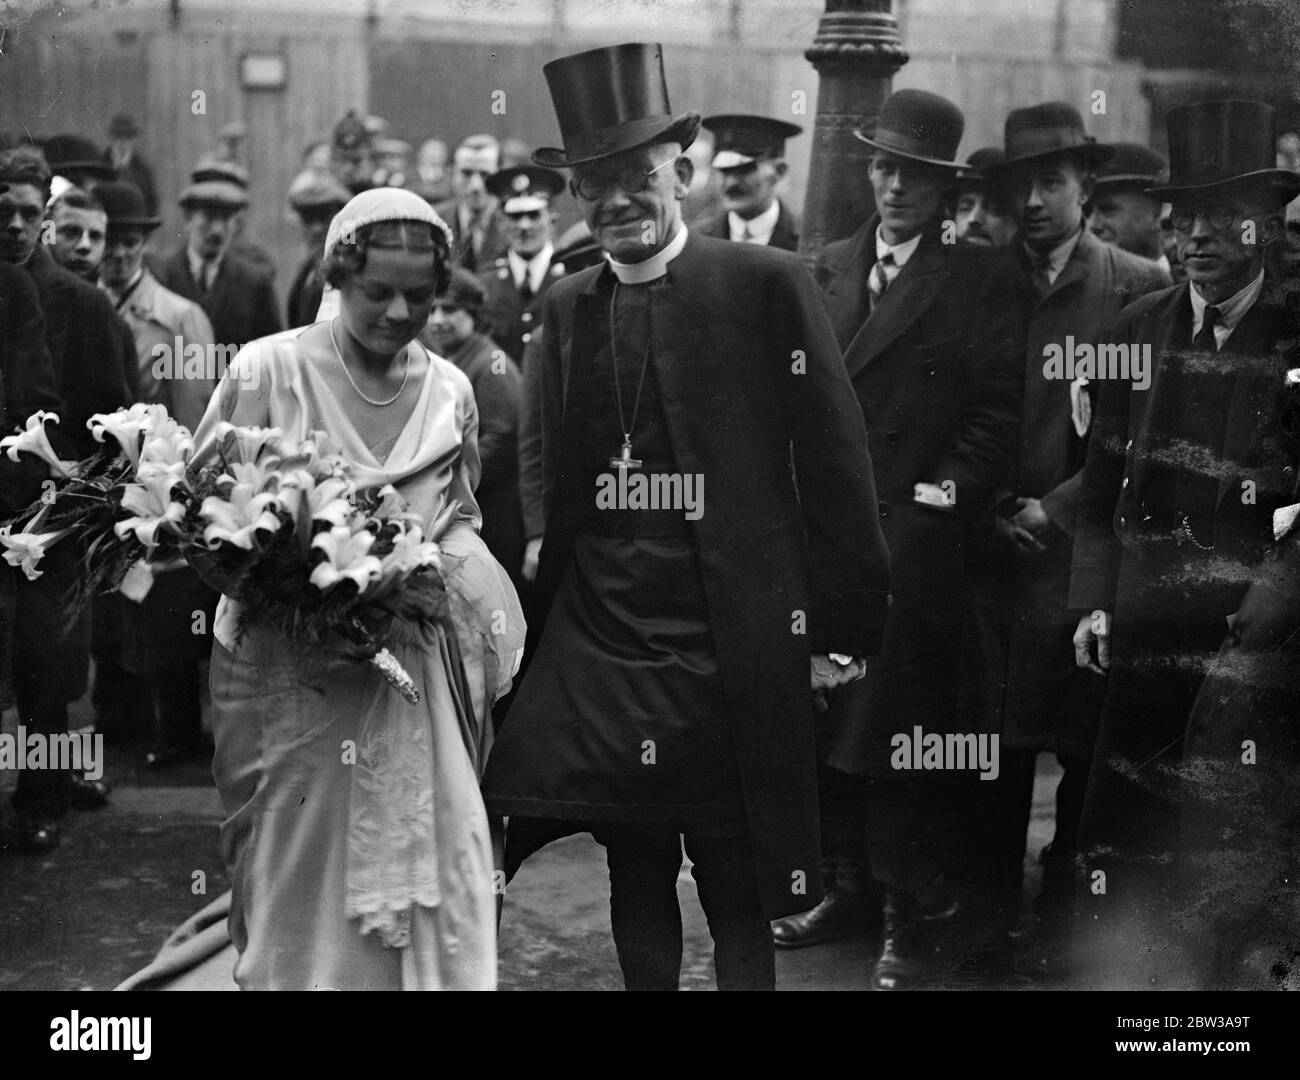 Three bishops at wedding of bishops daughter to bishop ' s son . Three bishops took part in the wedding at St Margaret ' s Church , Lothbury , City , of Miss Nancy Curzon , daughter of the Bishop of Stepney , to Mr Michael Willcox Perrin , son of the Assistant Bishop of London . The Bishop of London ( Dr Ingram ) with Bishop Perrin took the service , and the Bishop of Stepney gave his daughter away . Photo shows the bride and groom . 12 April 1934 Stock Photo